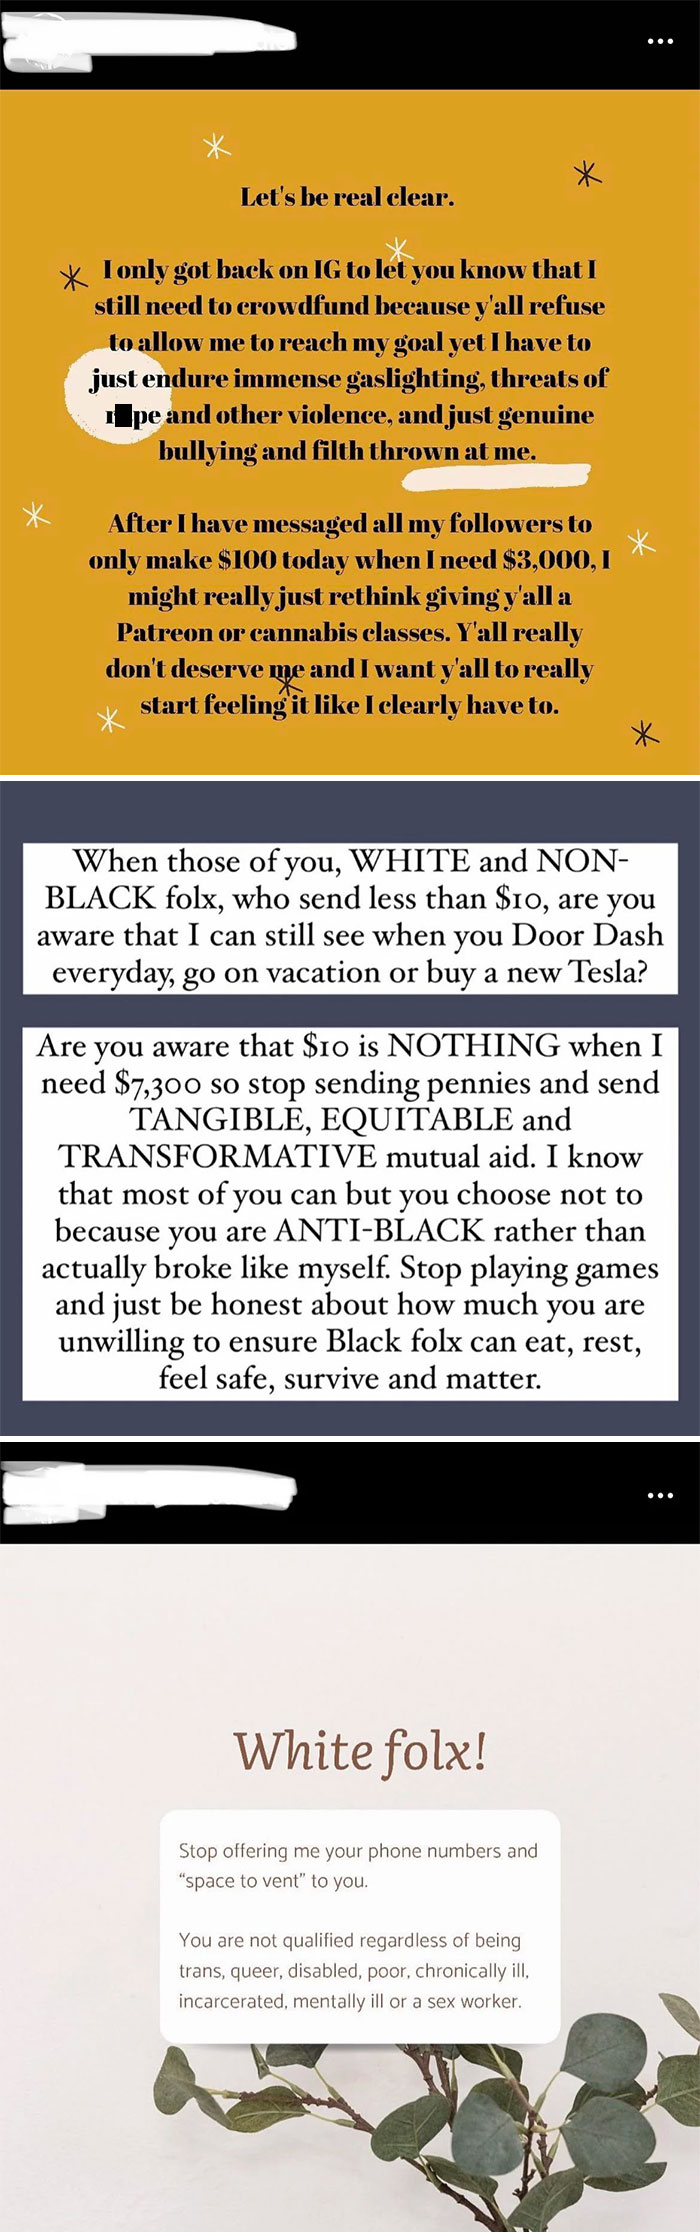 Apparently It’s Racist To Send Someone $10 And To Offer A Space To Vent